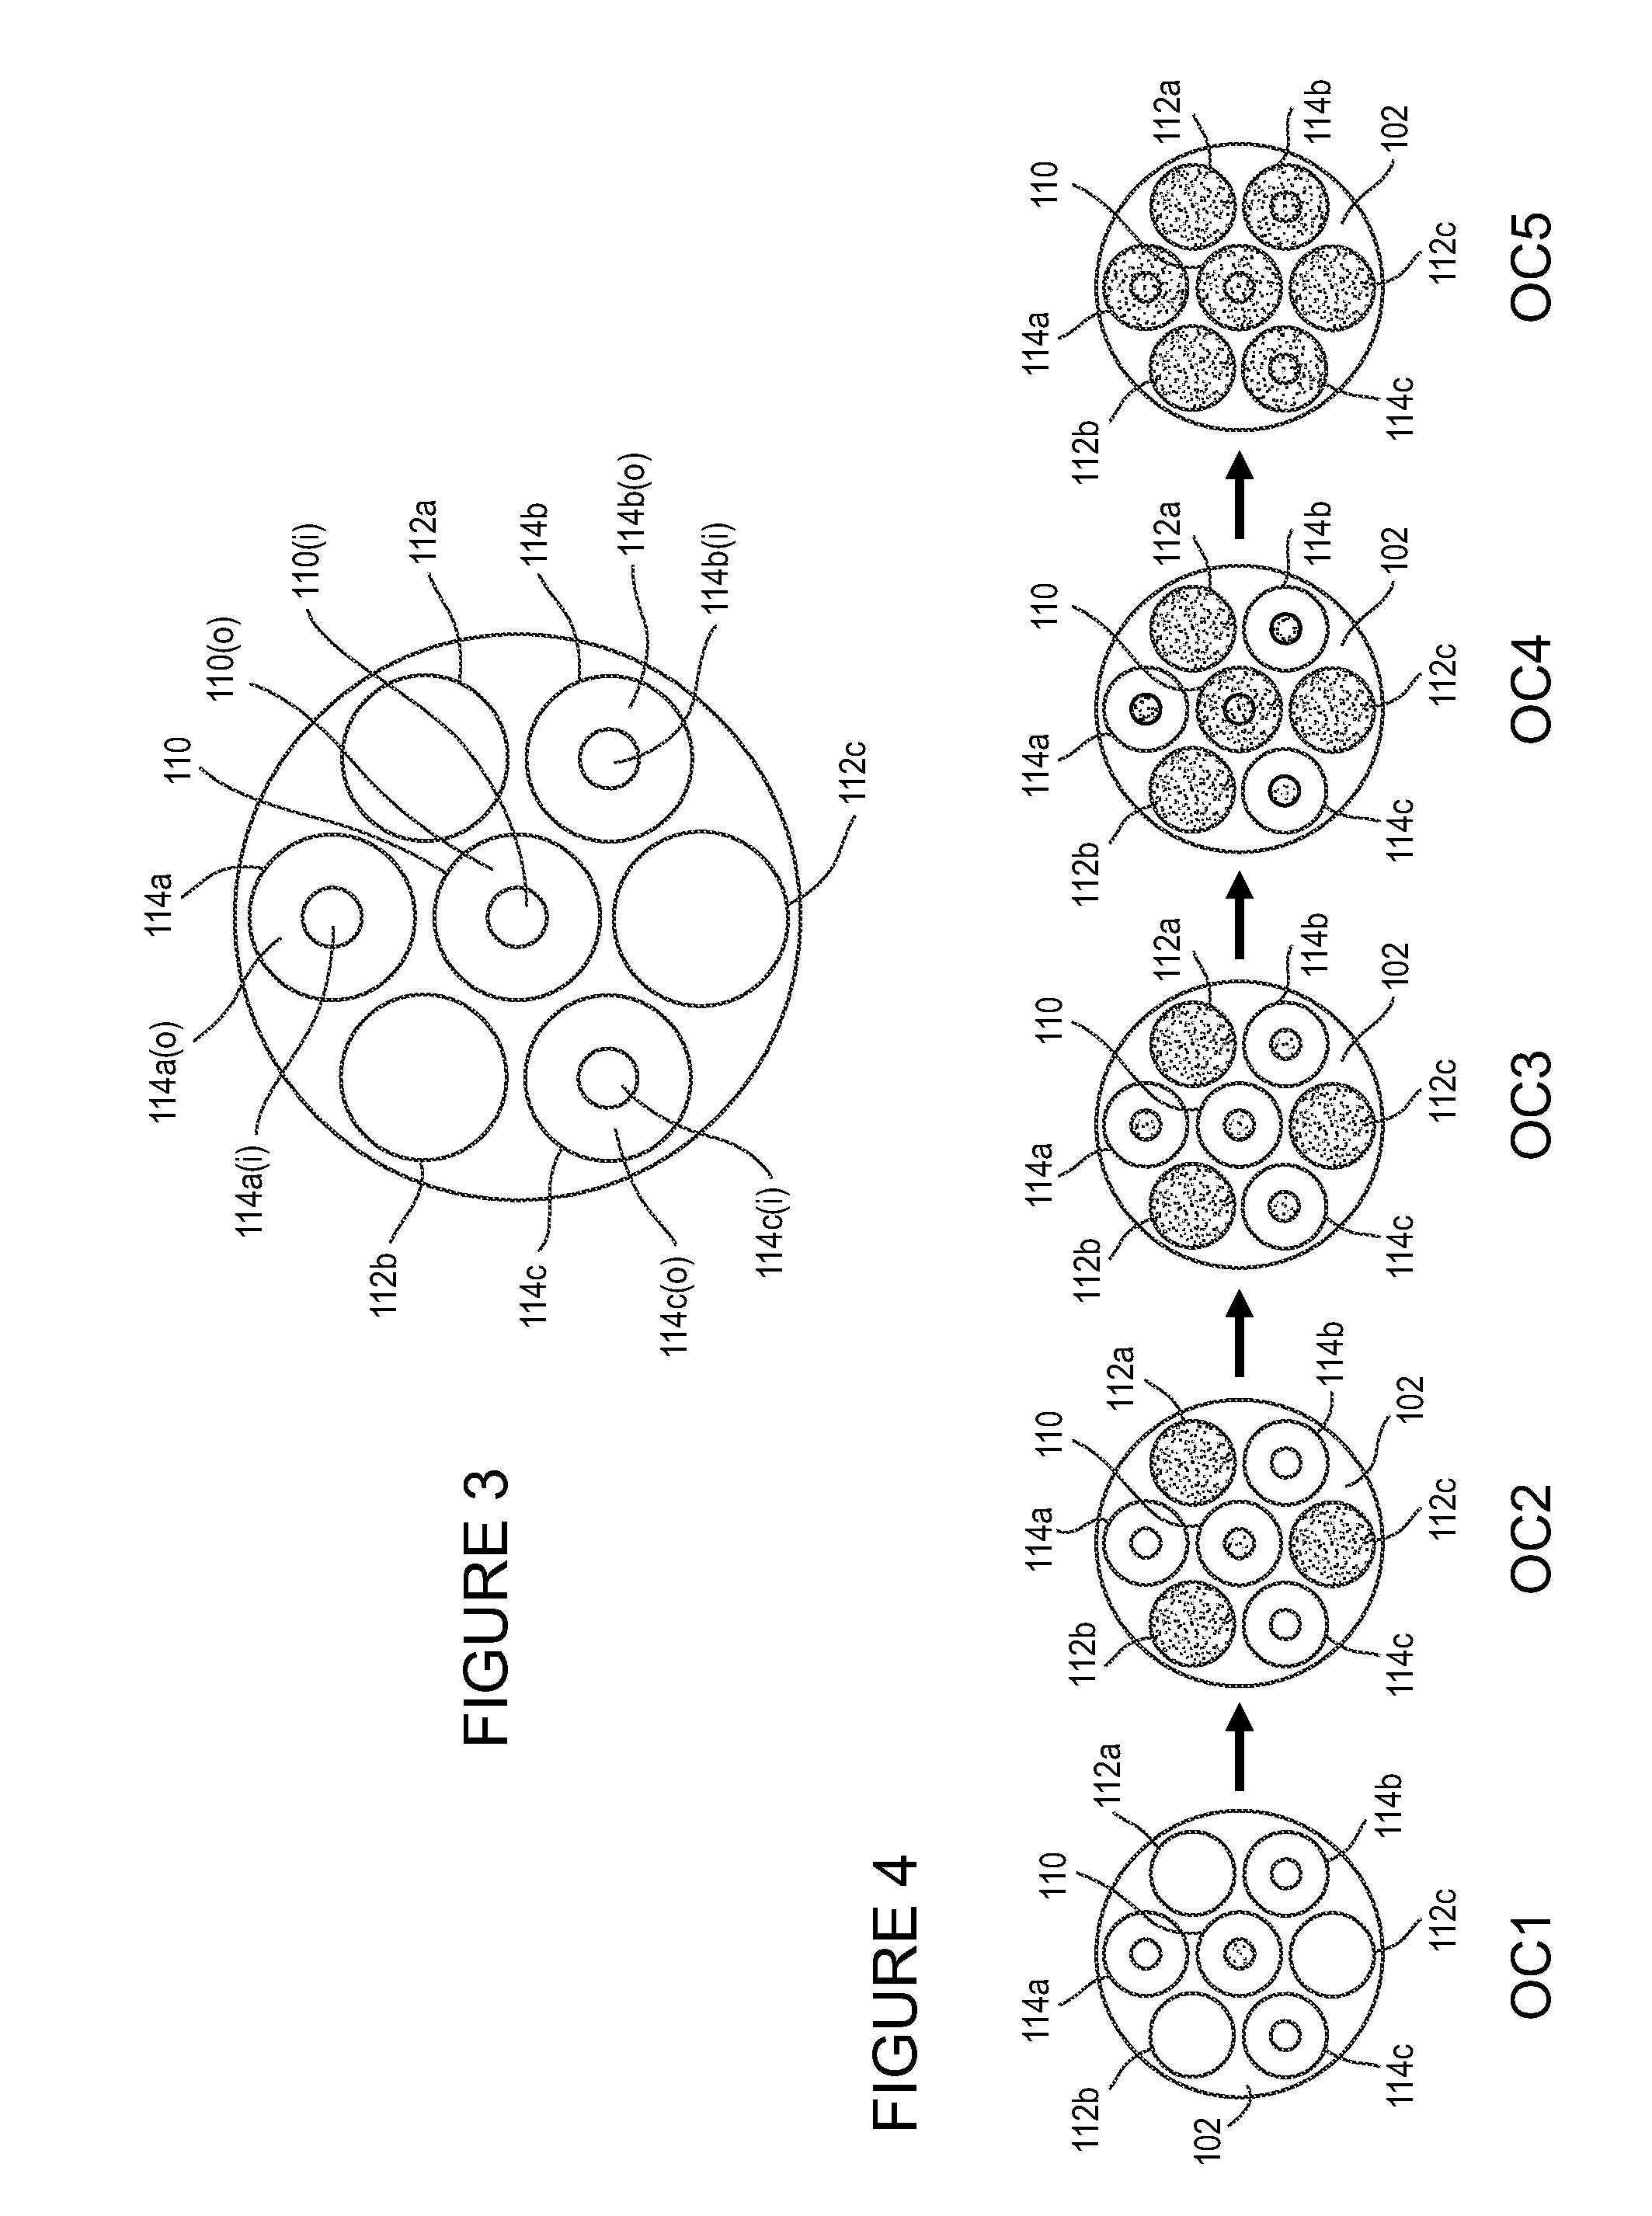 Turbine combustor with fuel nozzles having inner and outer fuel circuits